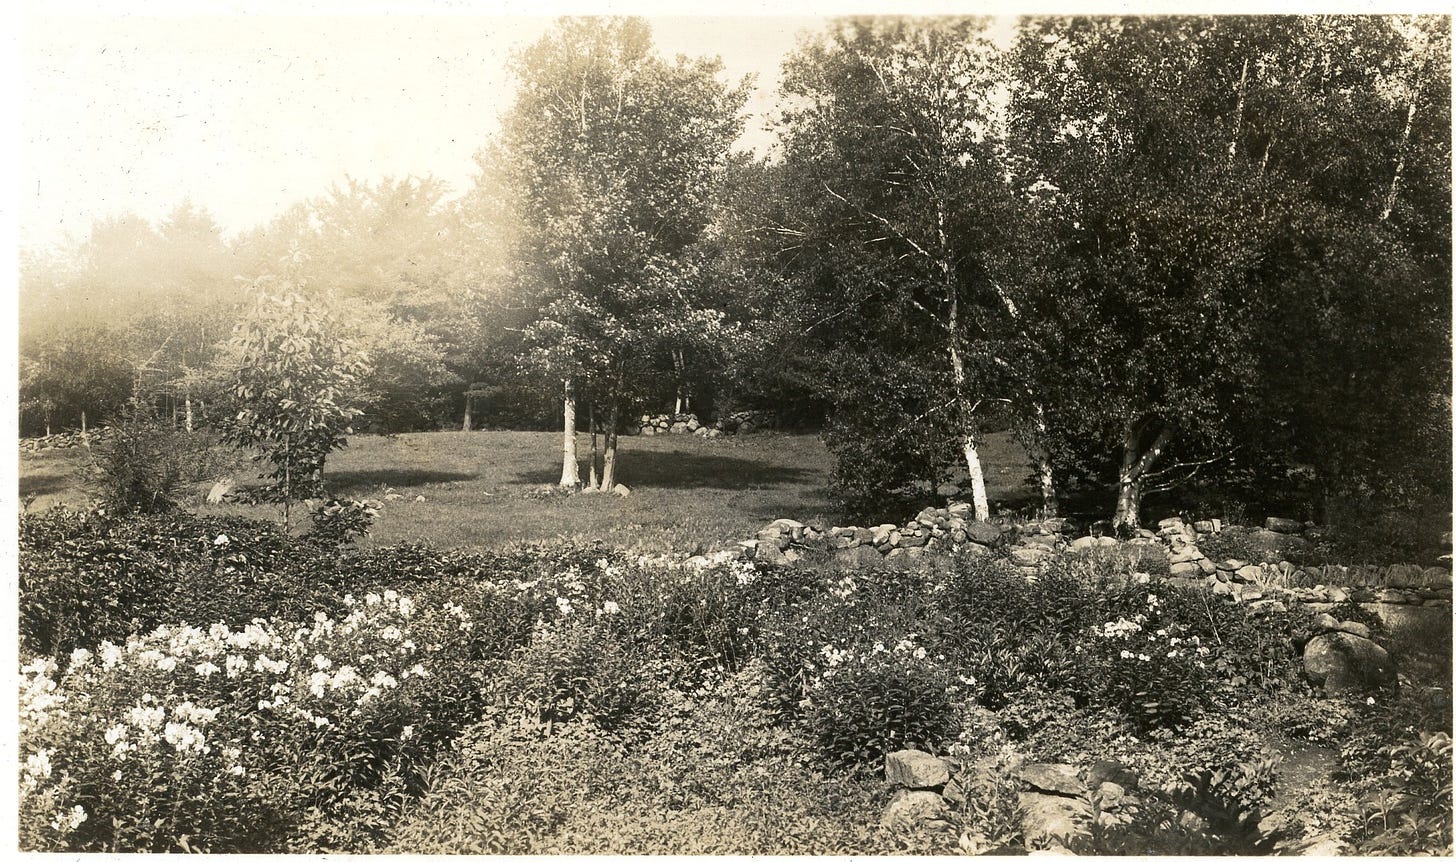 Flower bed, rock wall and clumps of trees